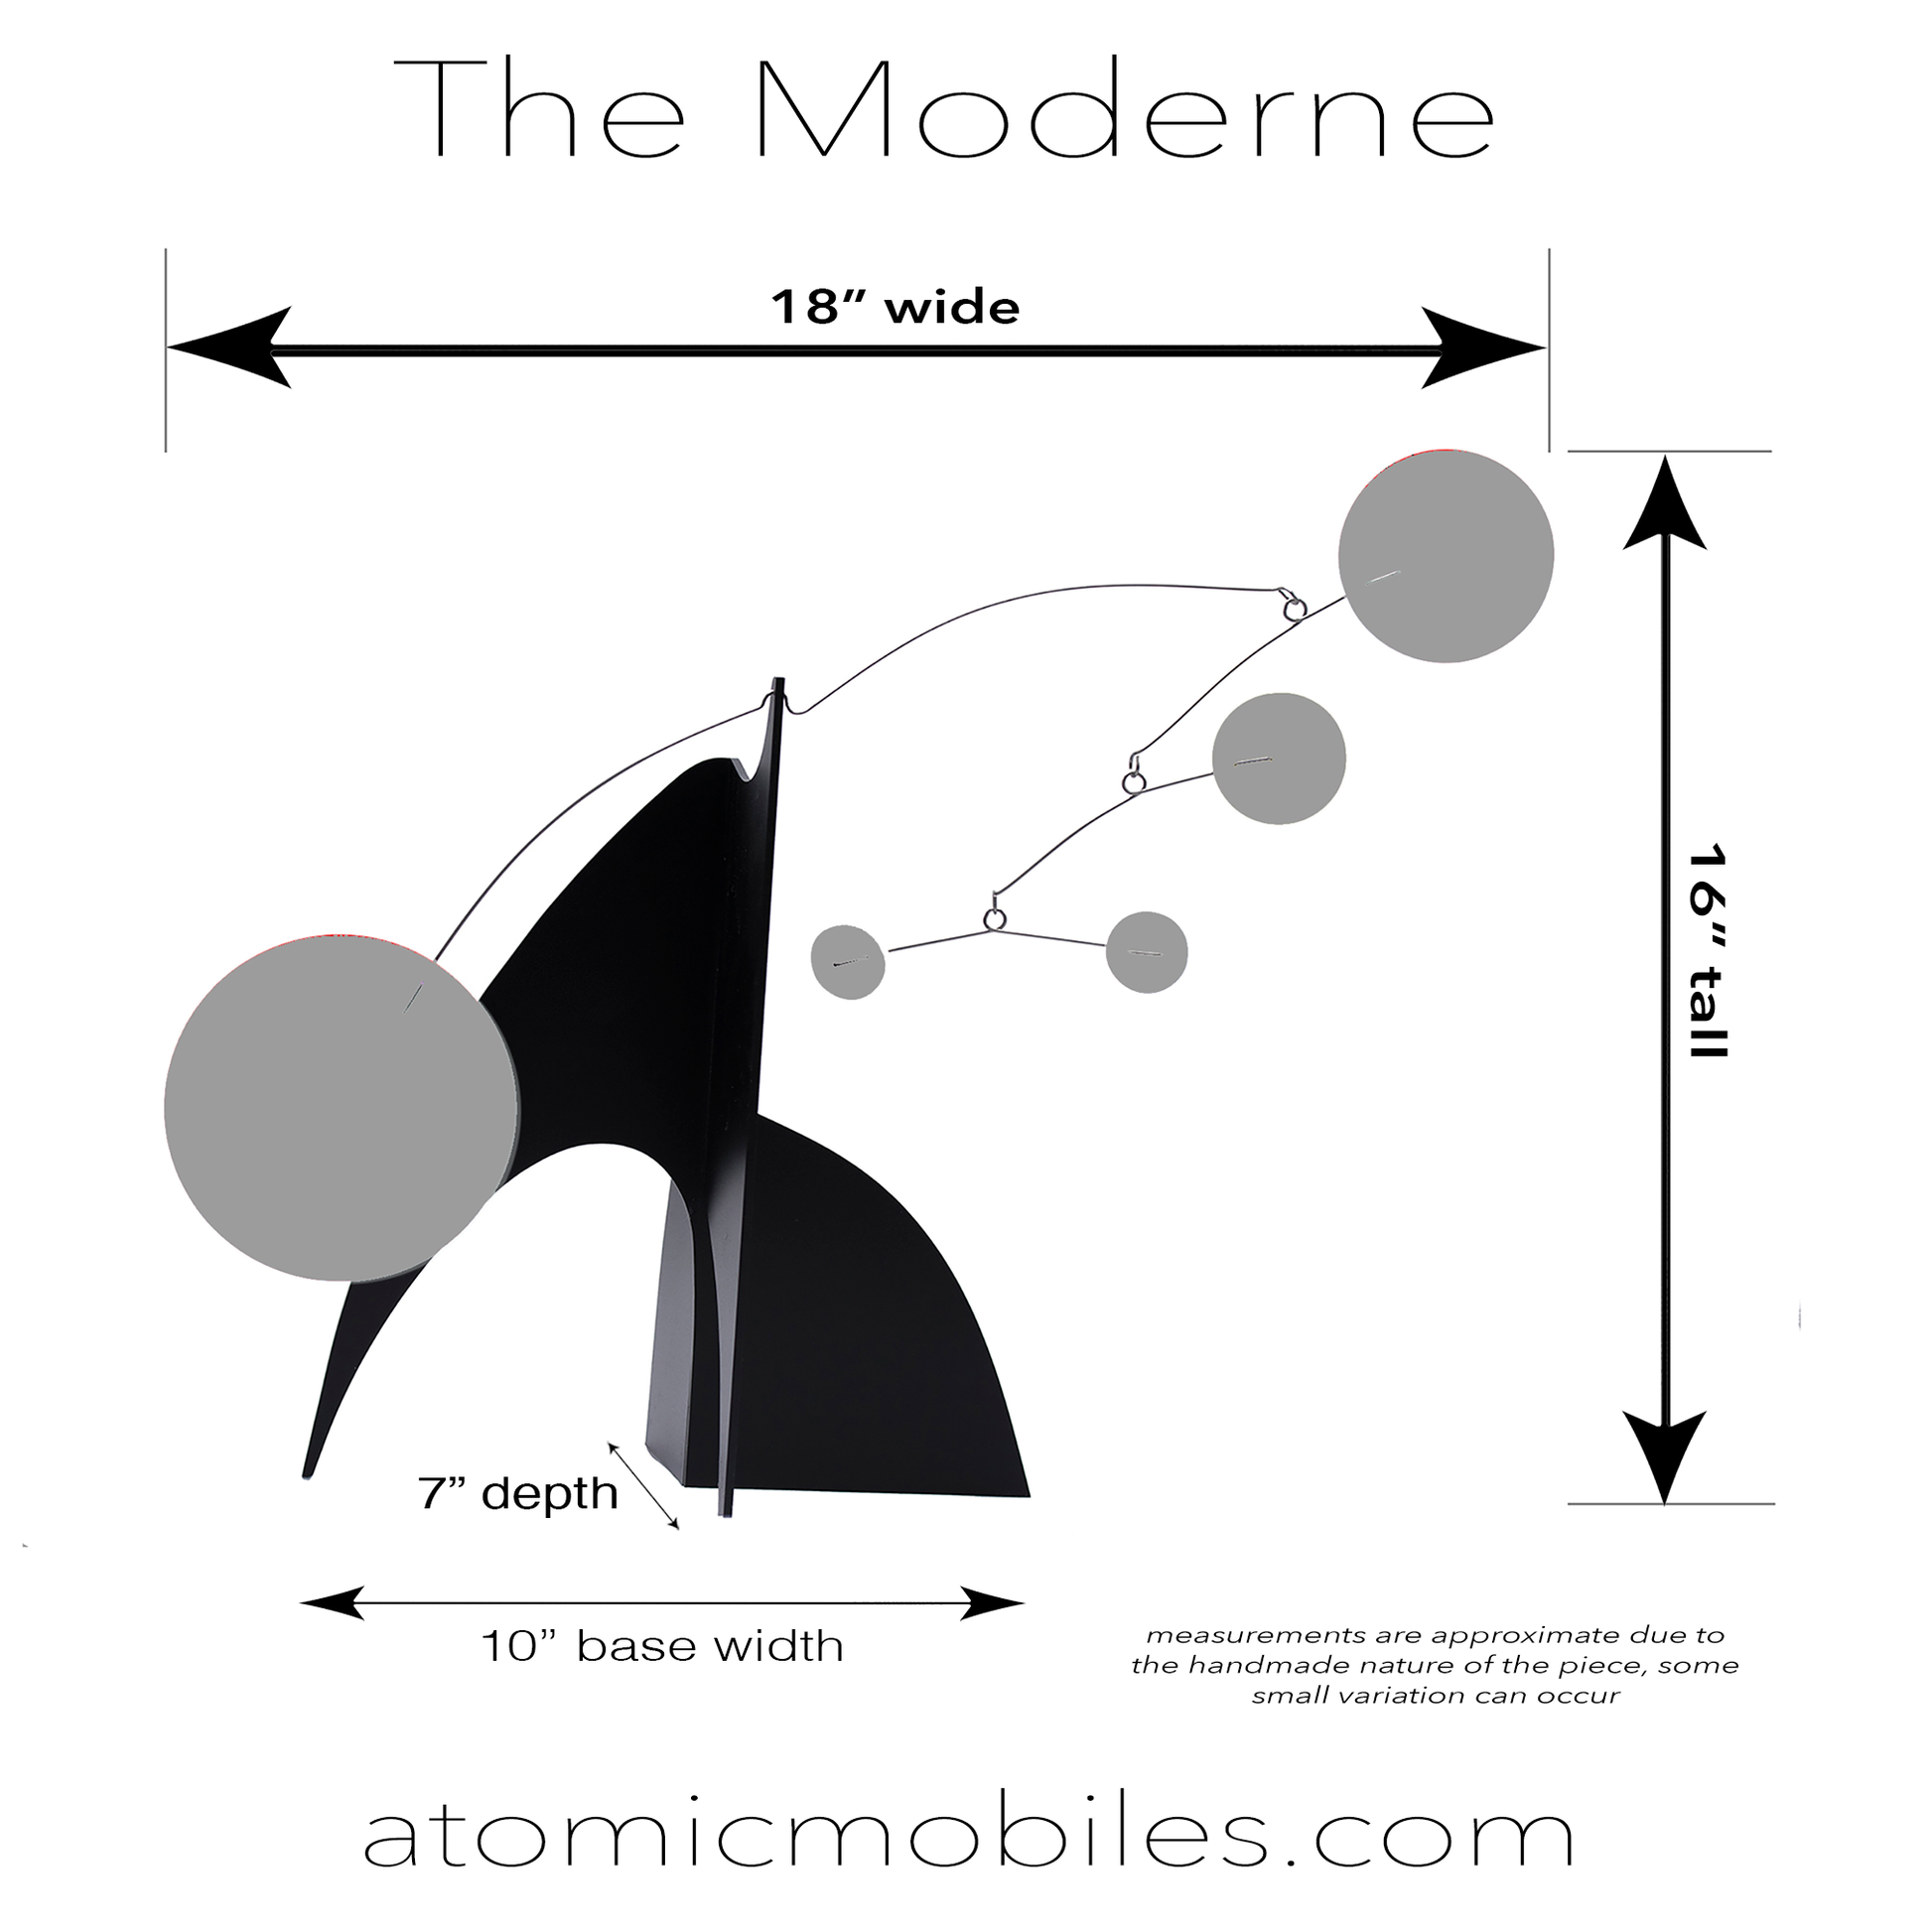 Measurements of the Moderne Art Stabile Sculpture hand made from acrylic plexiglass in Los Angeles by AtomicMobiles.com